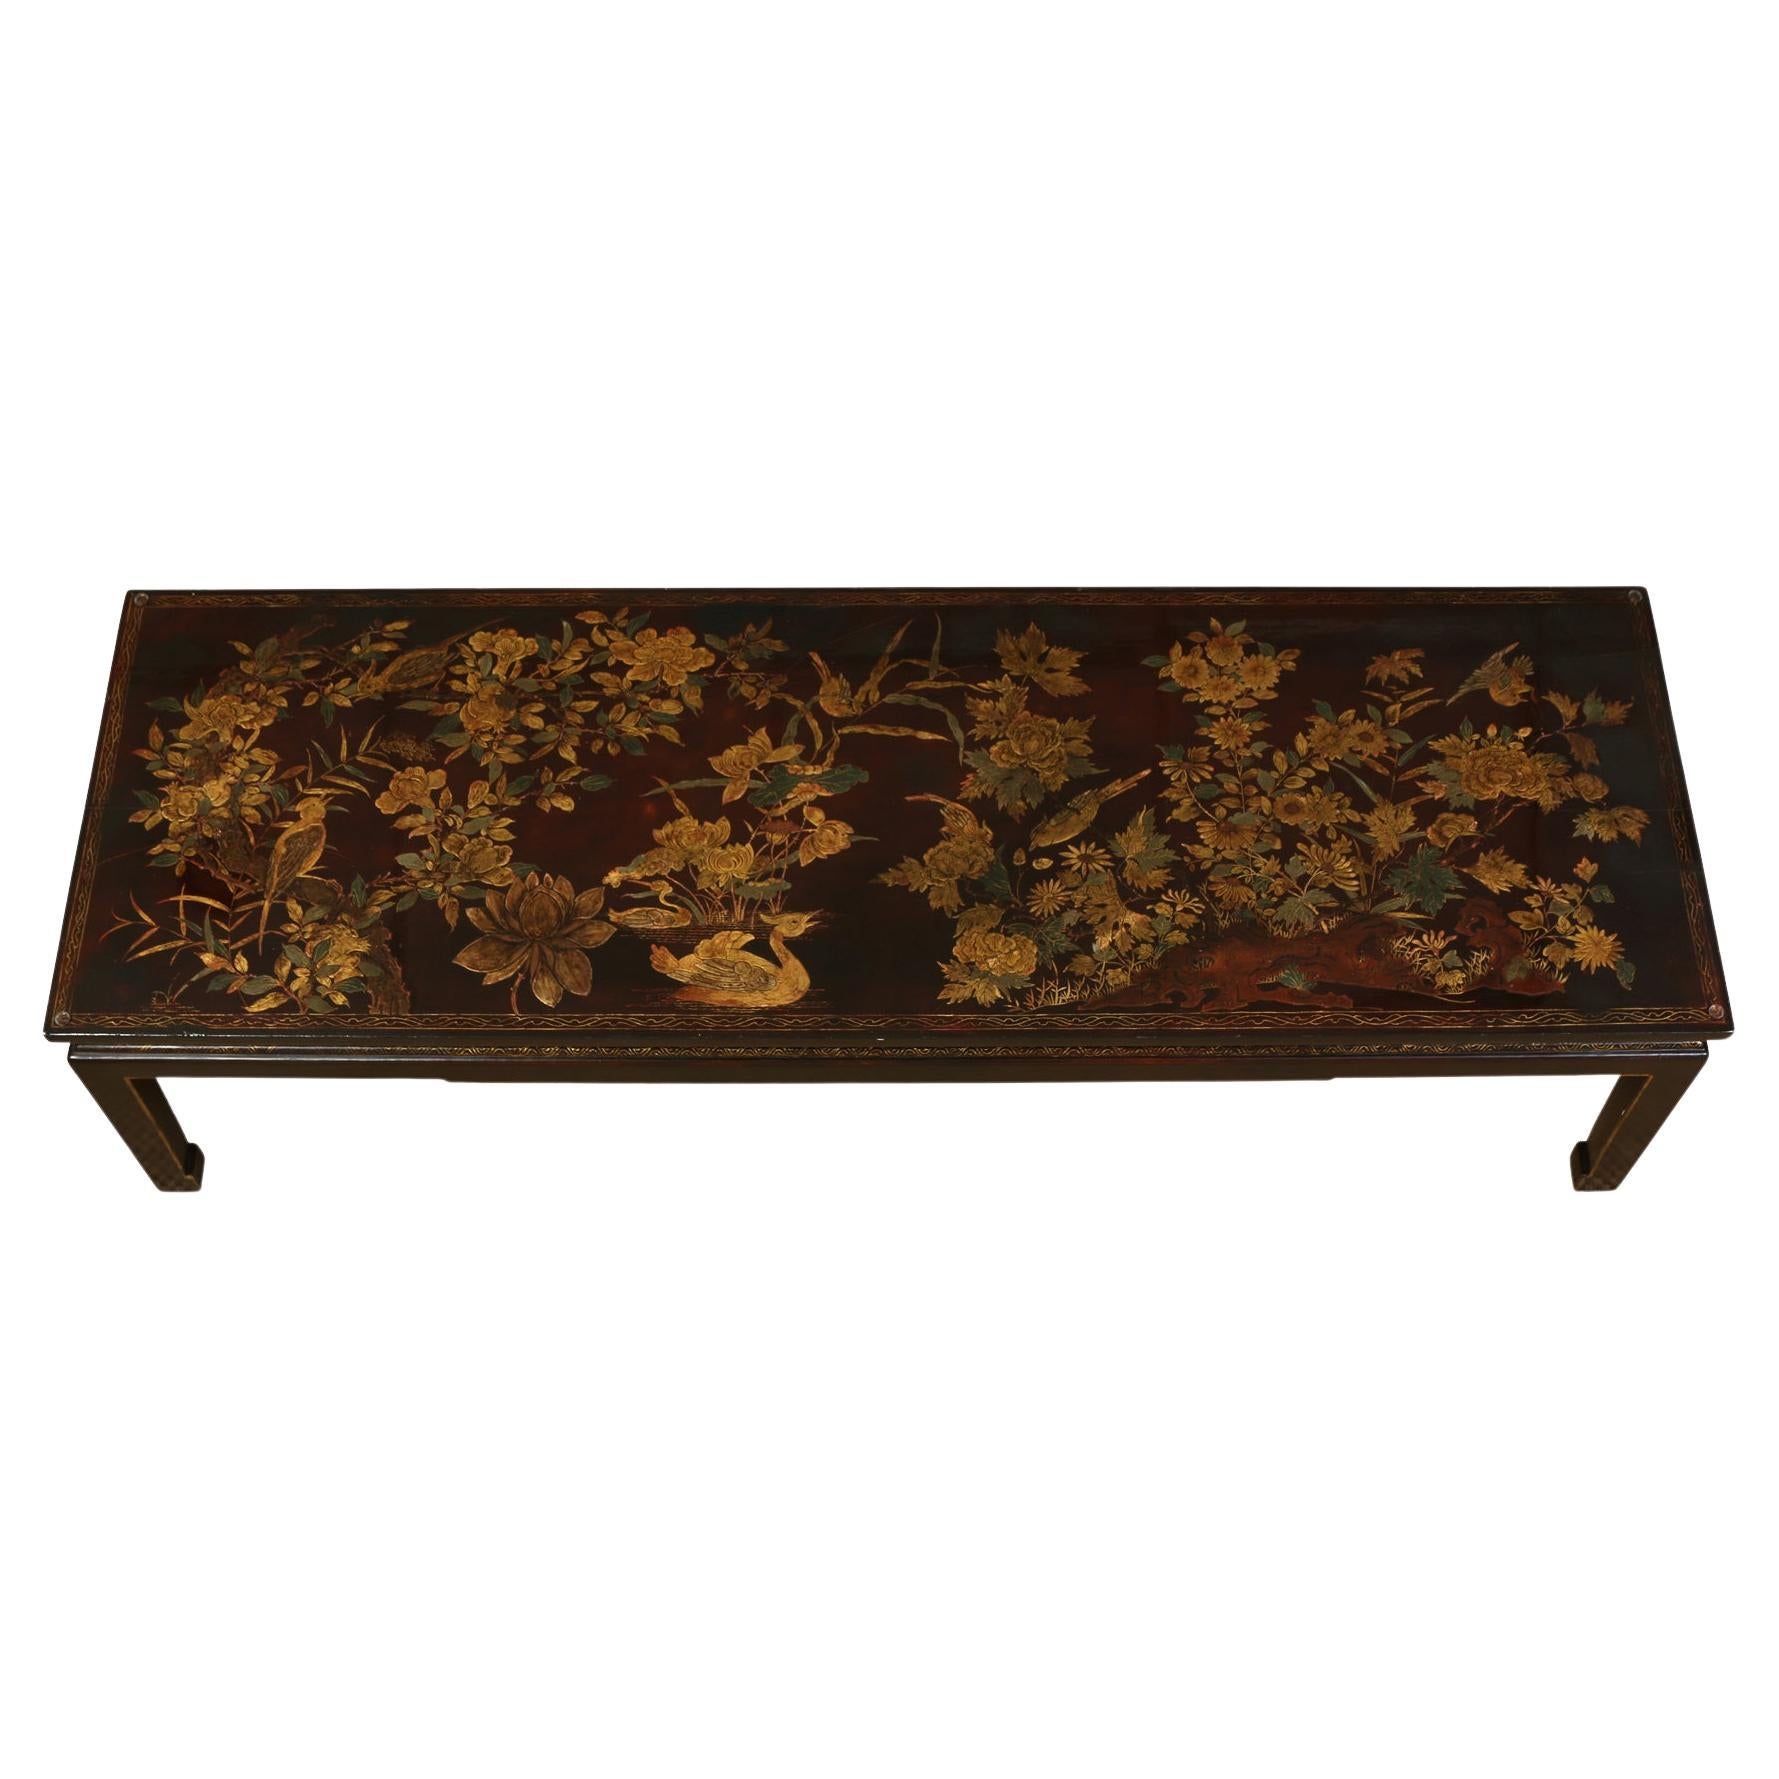 Chinoiserie Gilt Decorated Chocolate Brown Coffee Table With Glass Top For Sale